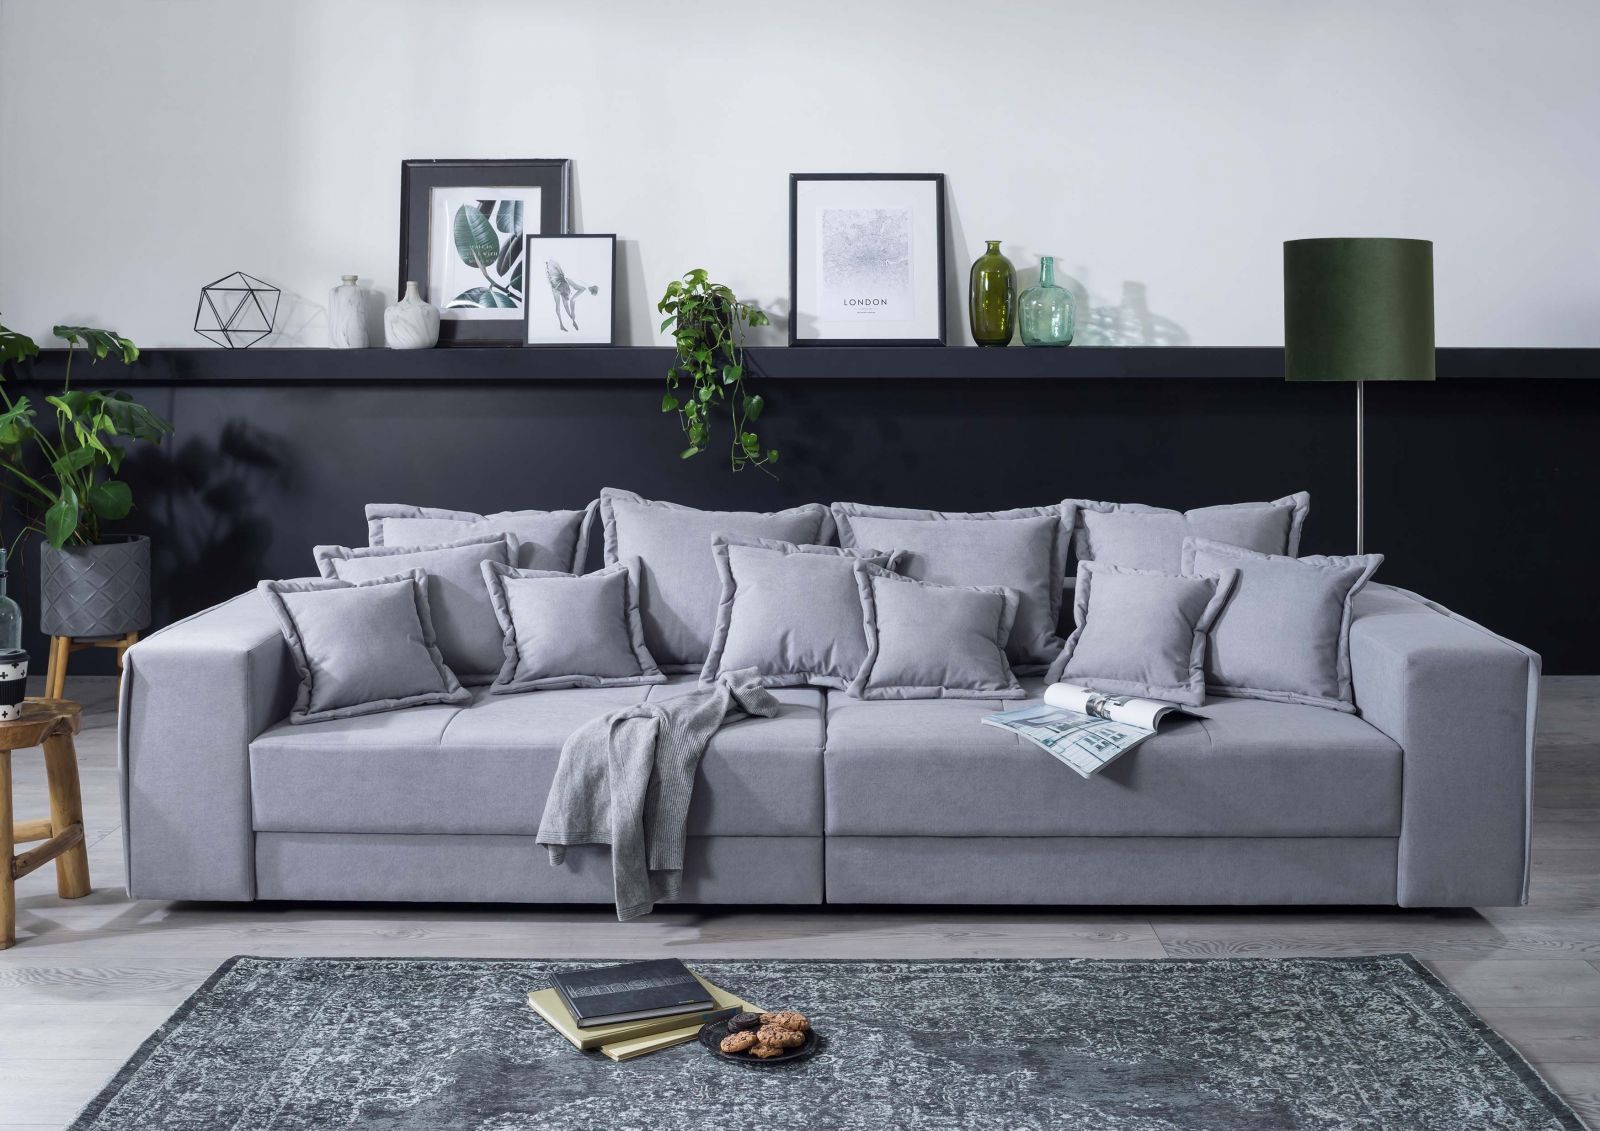 Big Sofa Industrial – Caseconrad Throughout Huge Sofas (View 2 of 15)